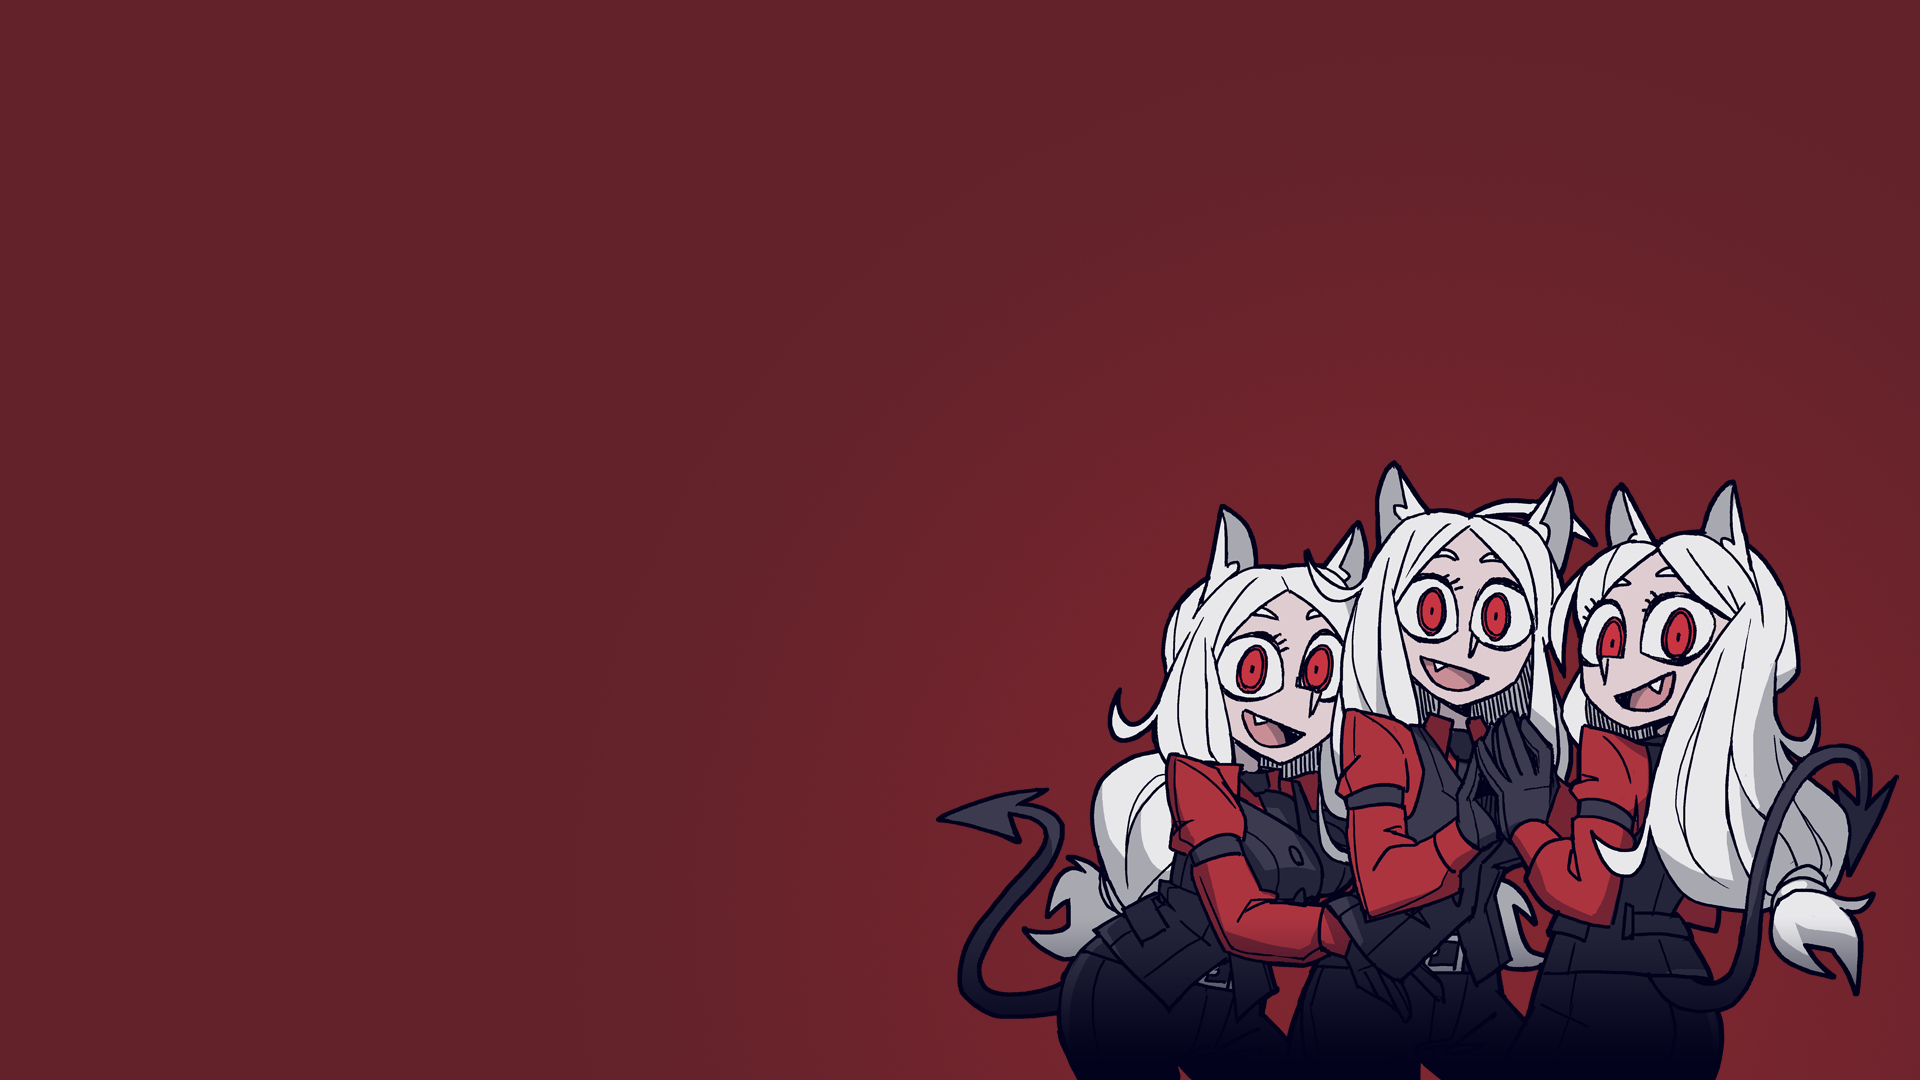 Cerberus Wallpaper Apk Download for Android Latest version 15  comGalaxyLwpCerberus93